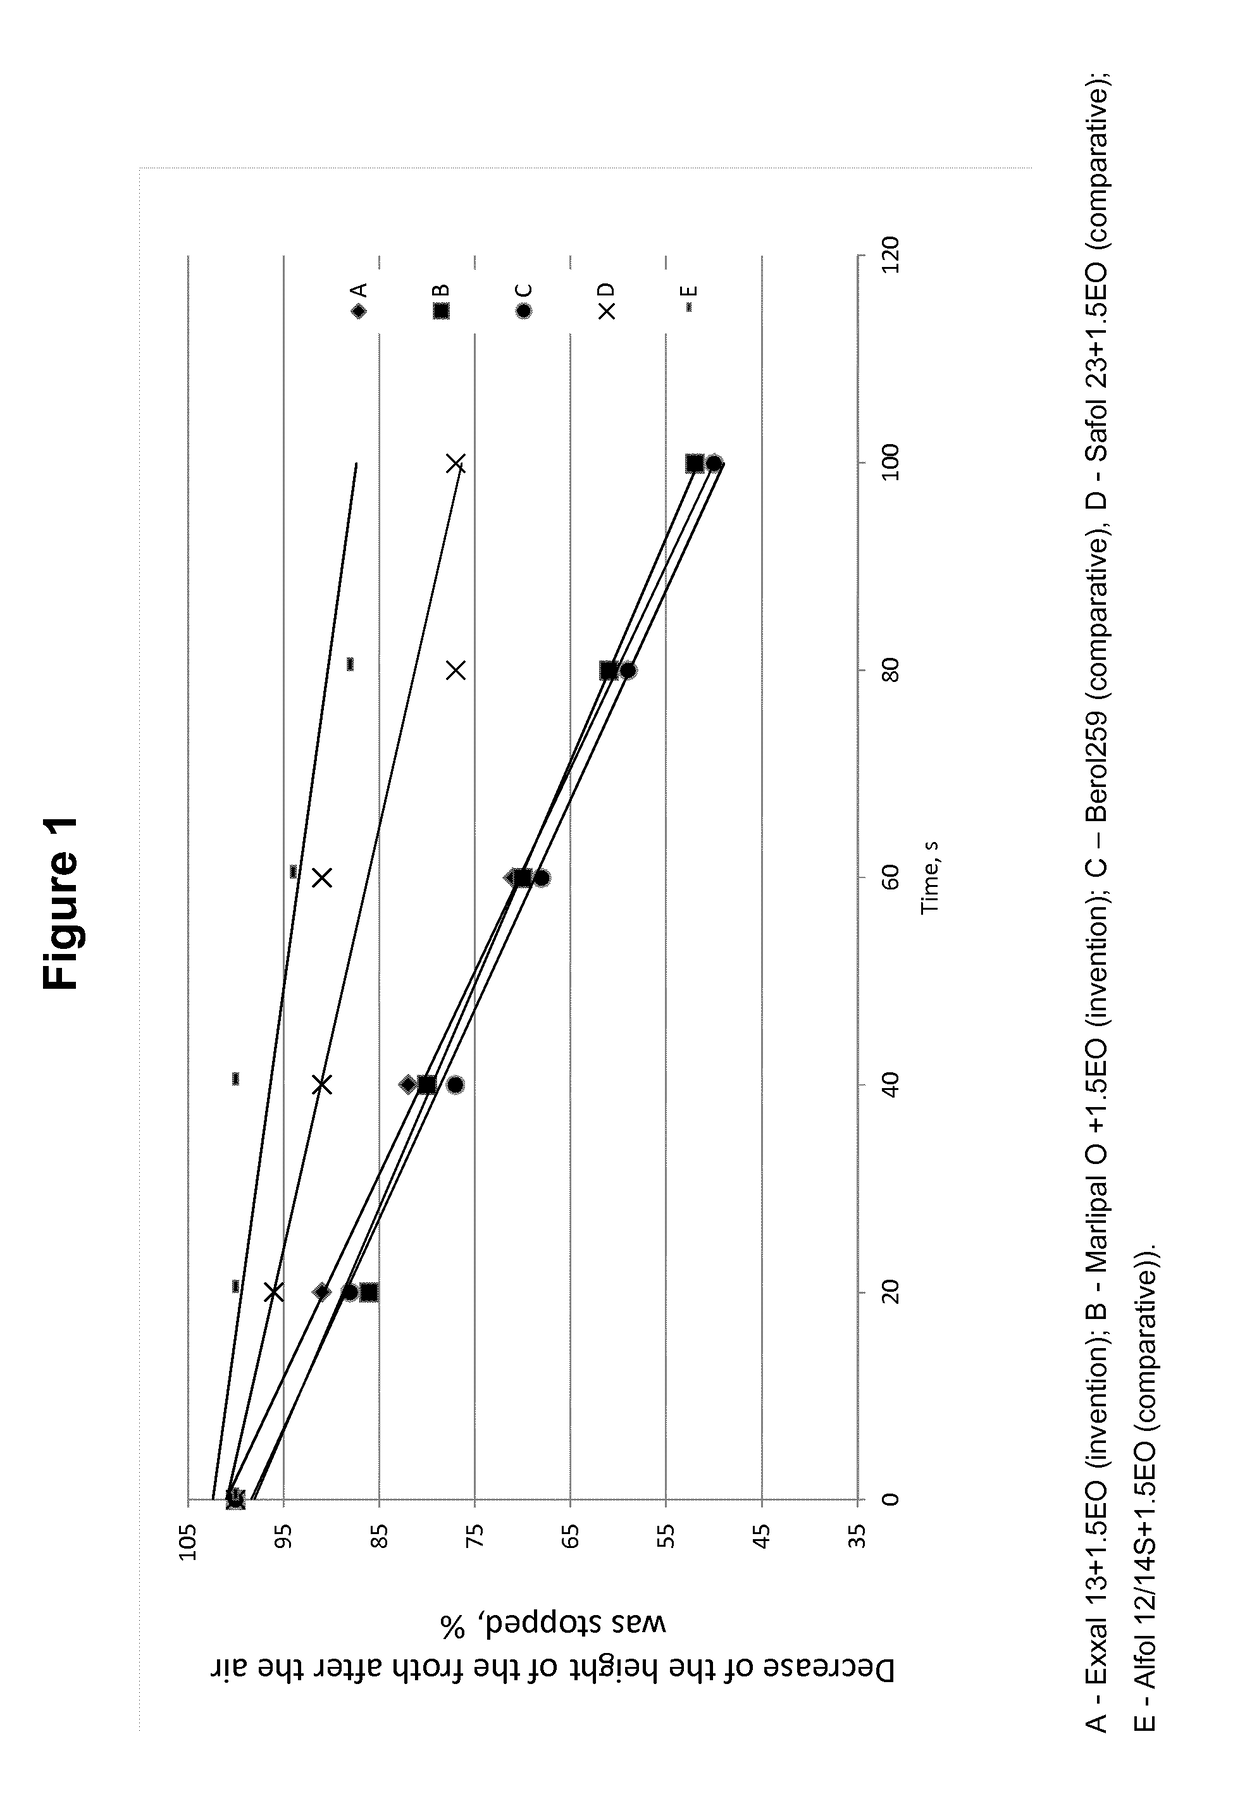 Use of Branched Alcohols and Alkoxylates Thereof as Secondary Collectors